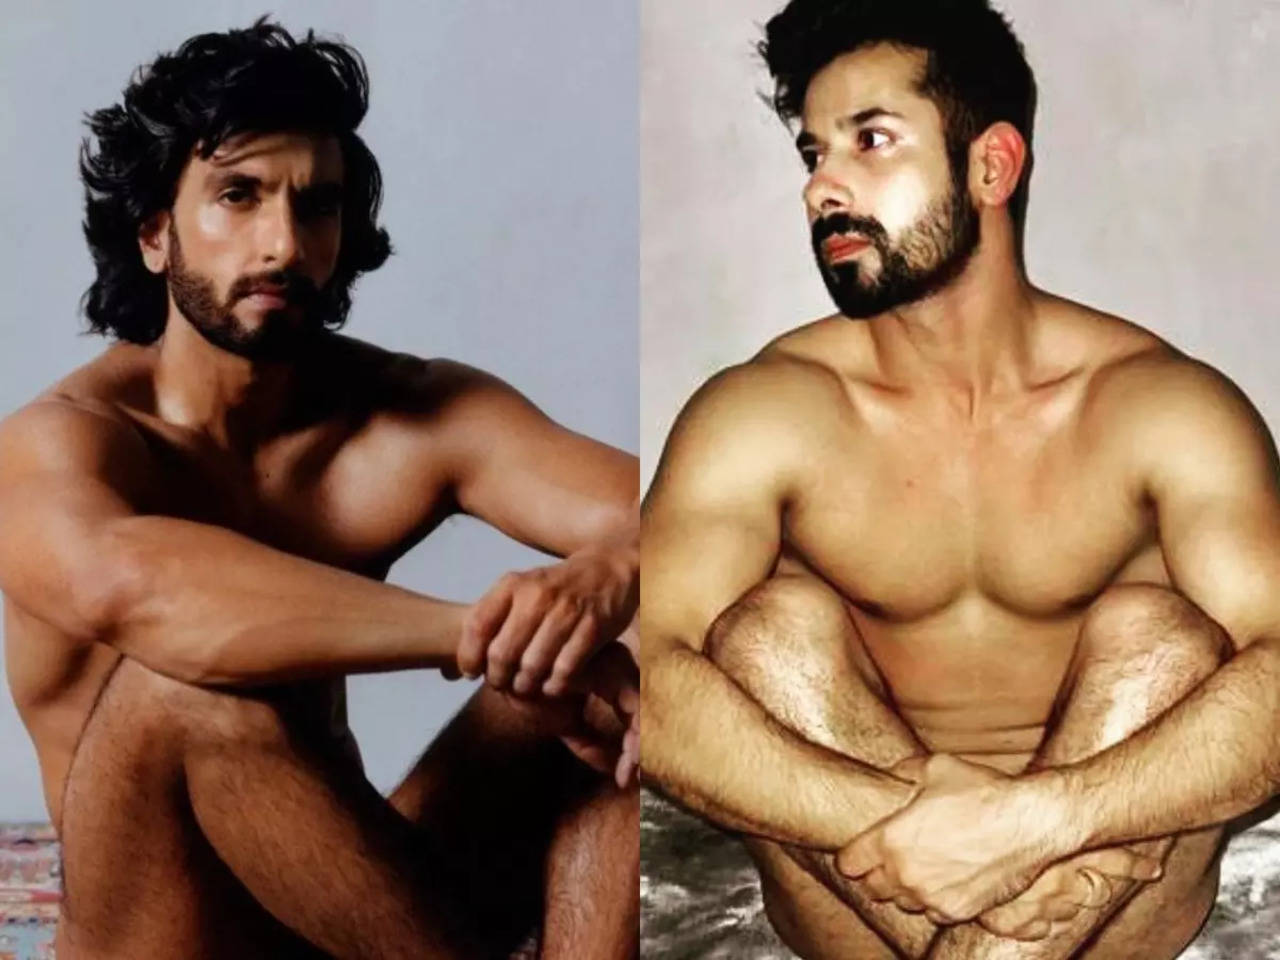 Exclusive Inspired by Ranveer Singh, actor Kunal Verma shares a photo showing his nude body, says I have worked hard so why not flaunt it? pic